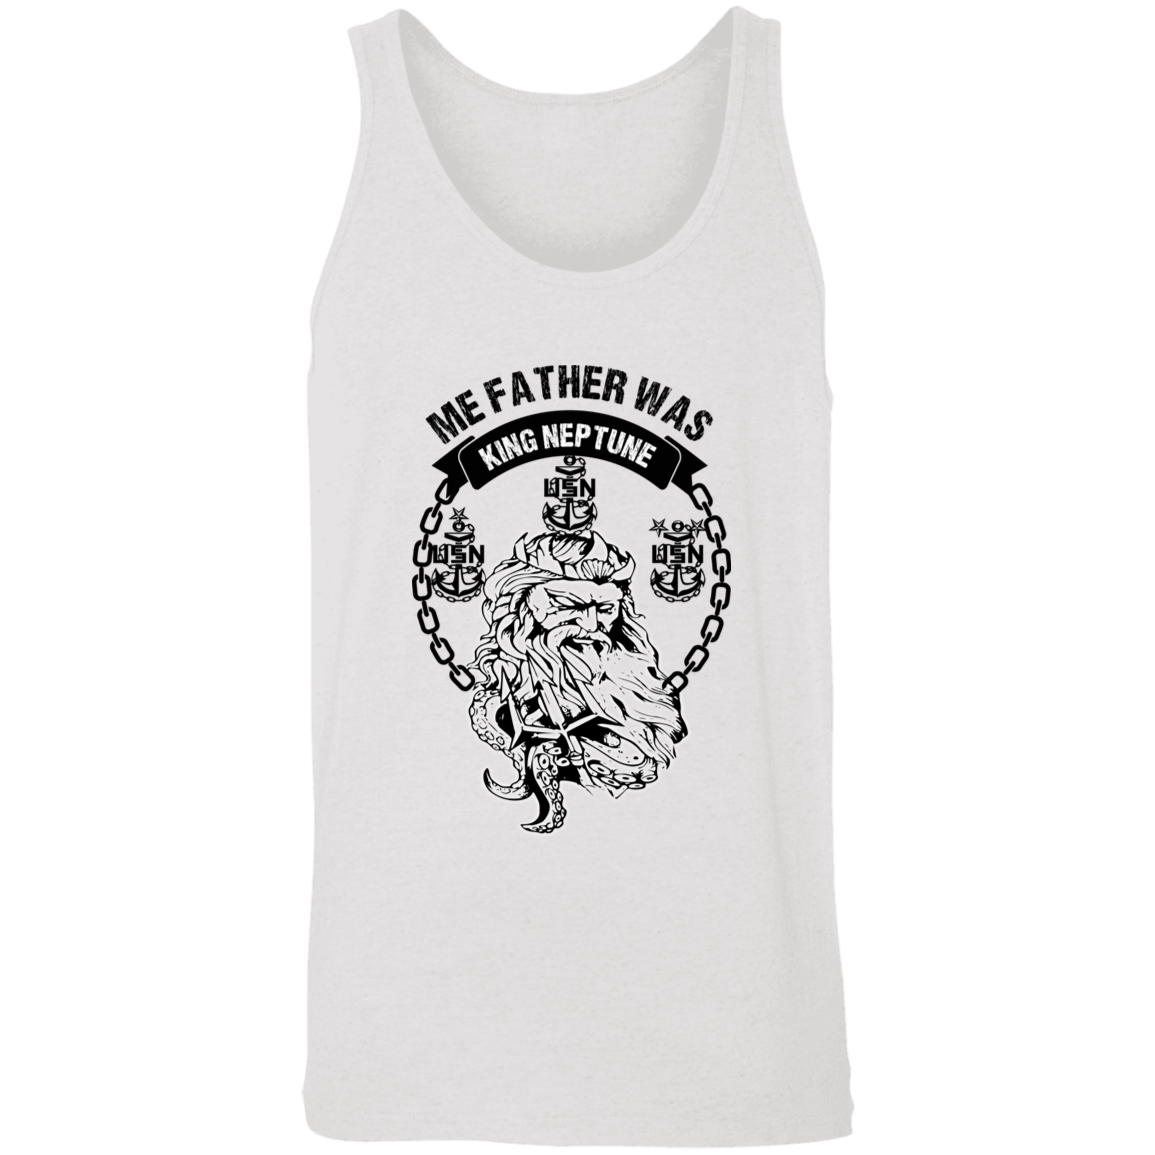 Me Father was King Neptune Unisex Tank